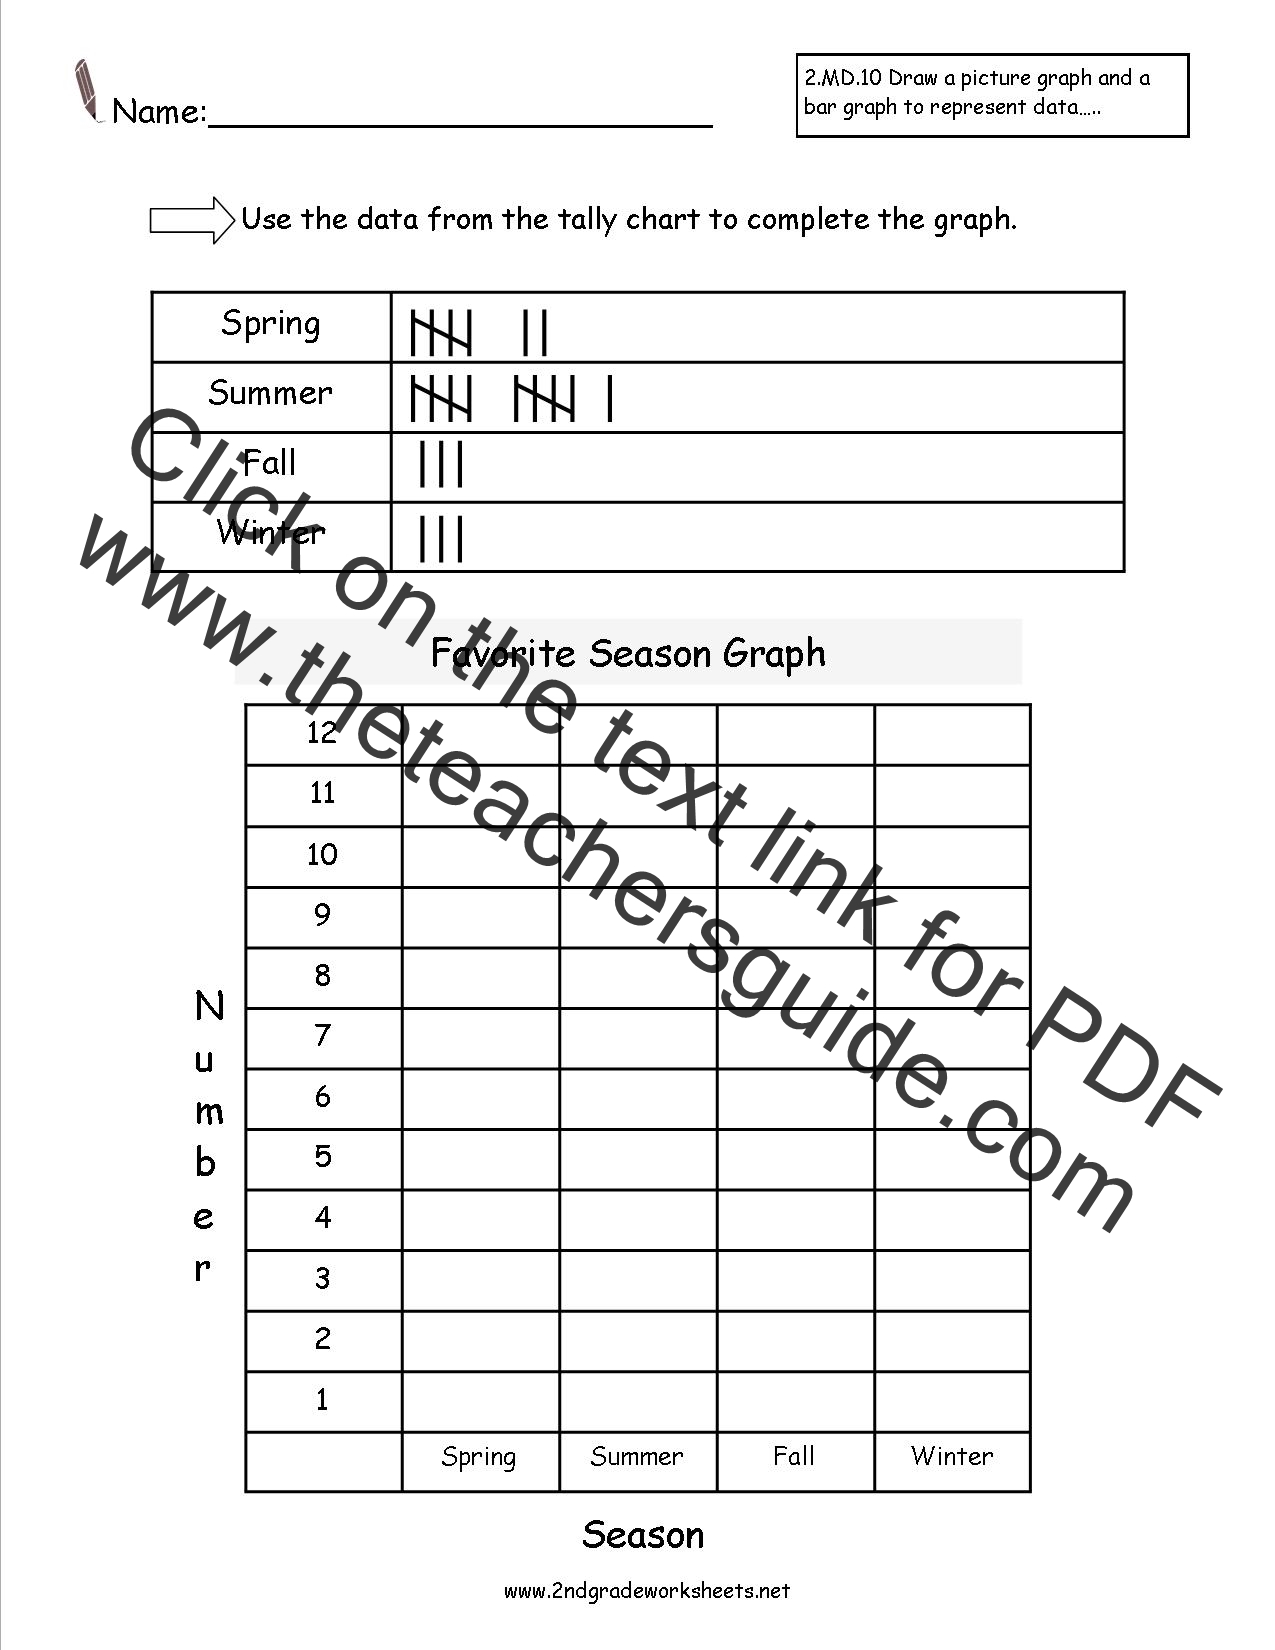 reading-charts-and-graphs-worksheet-bar-graphs-first-grade-with-images-picture-graph